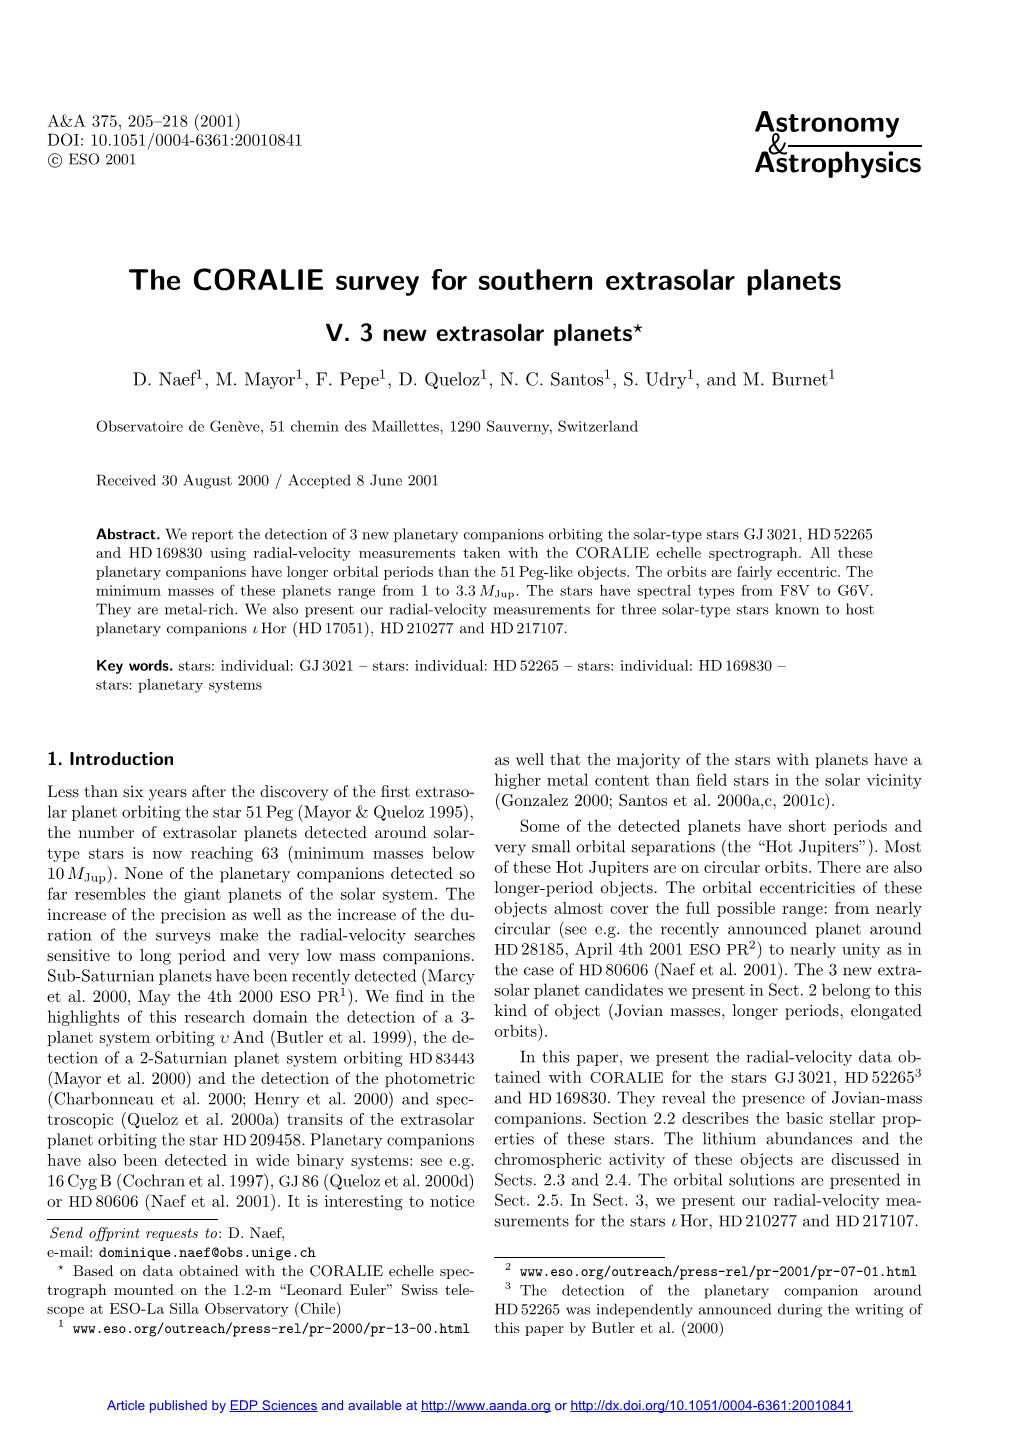 The CORALIE Survey for Southern Extrasolar Planets